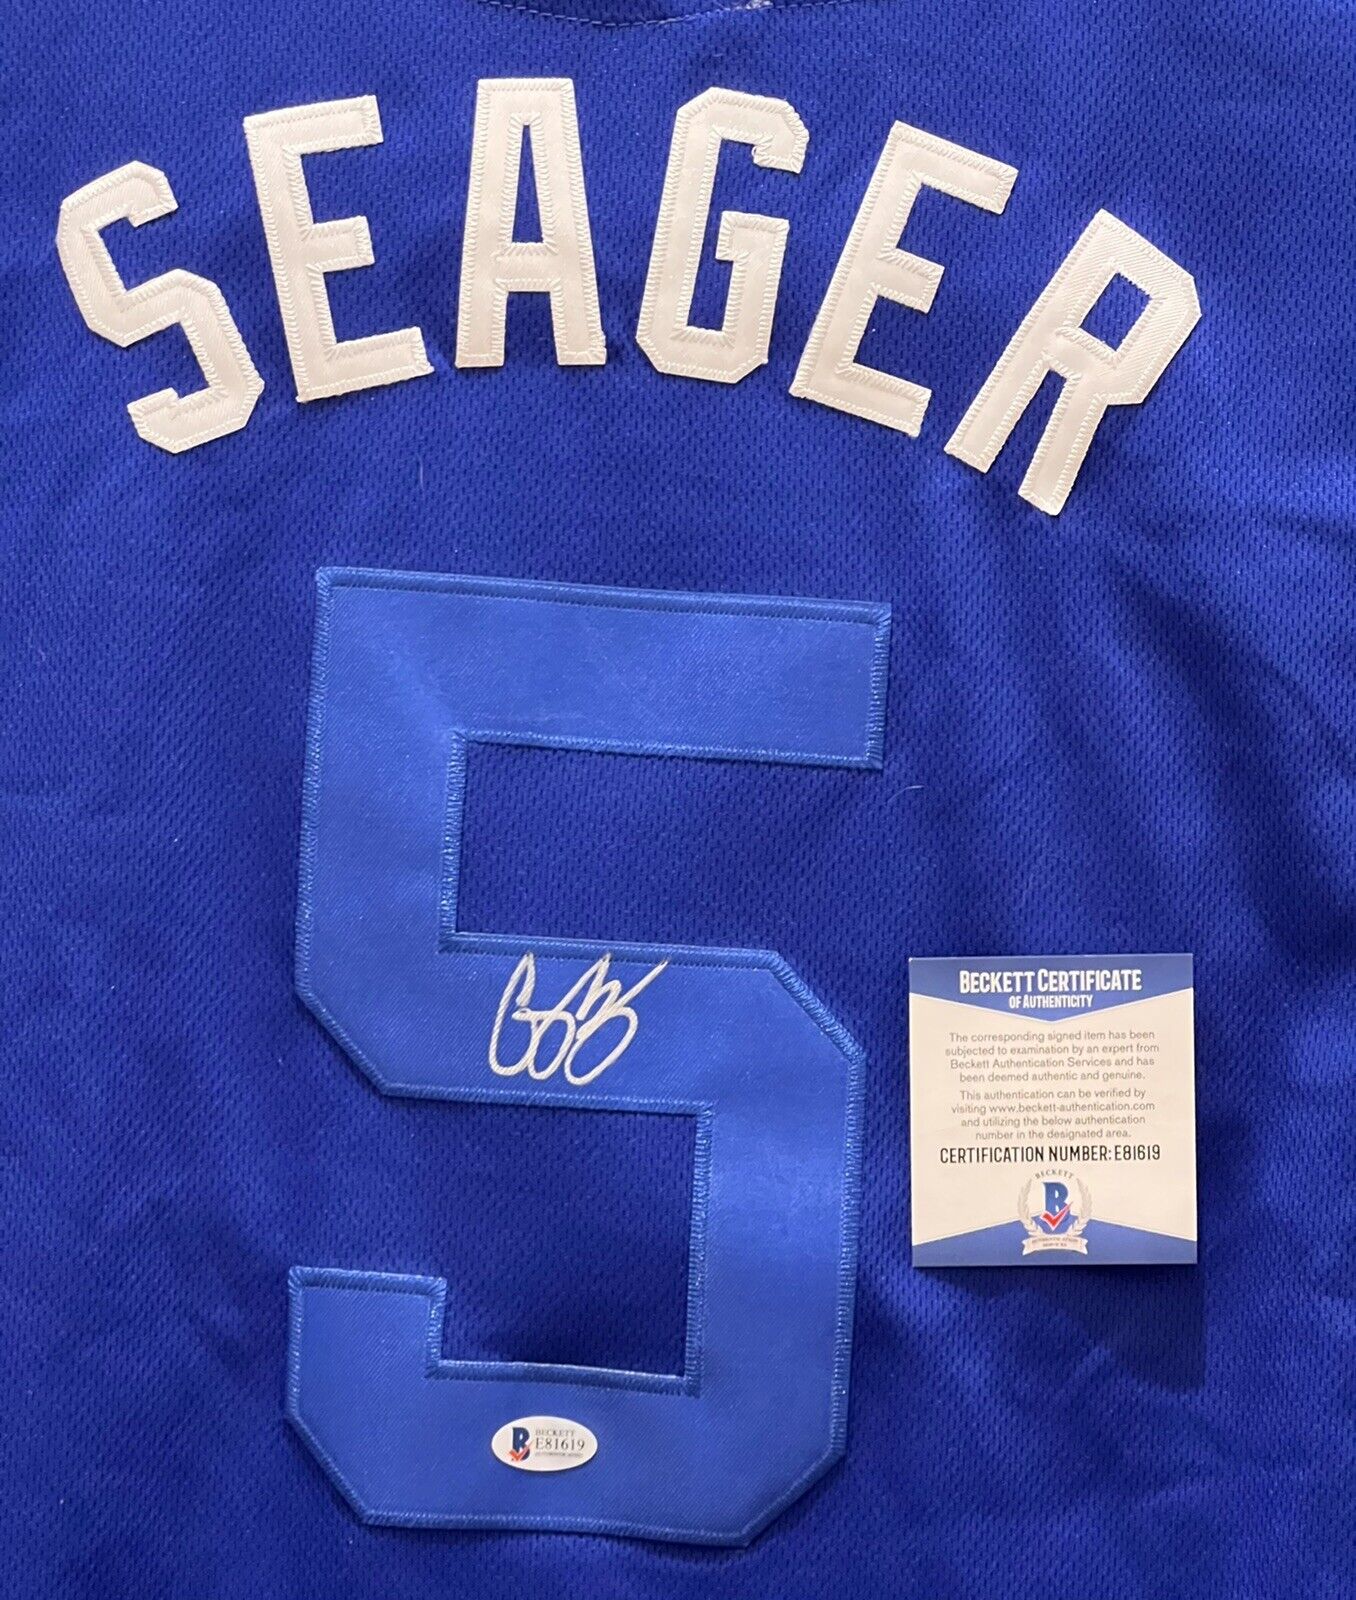 corey seager rangers jersey